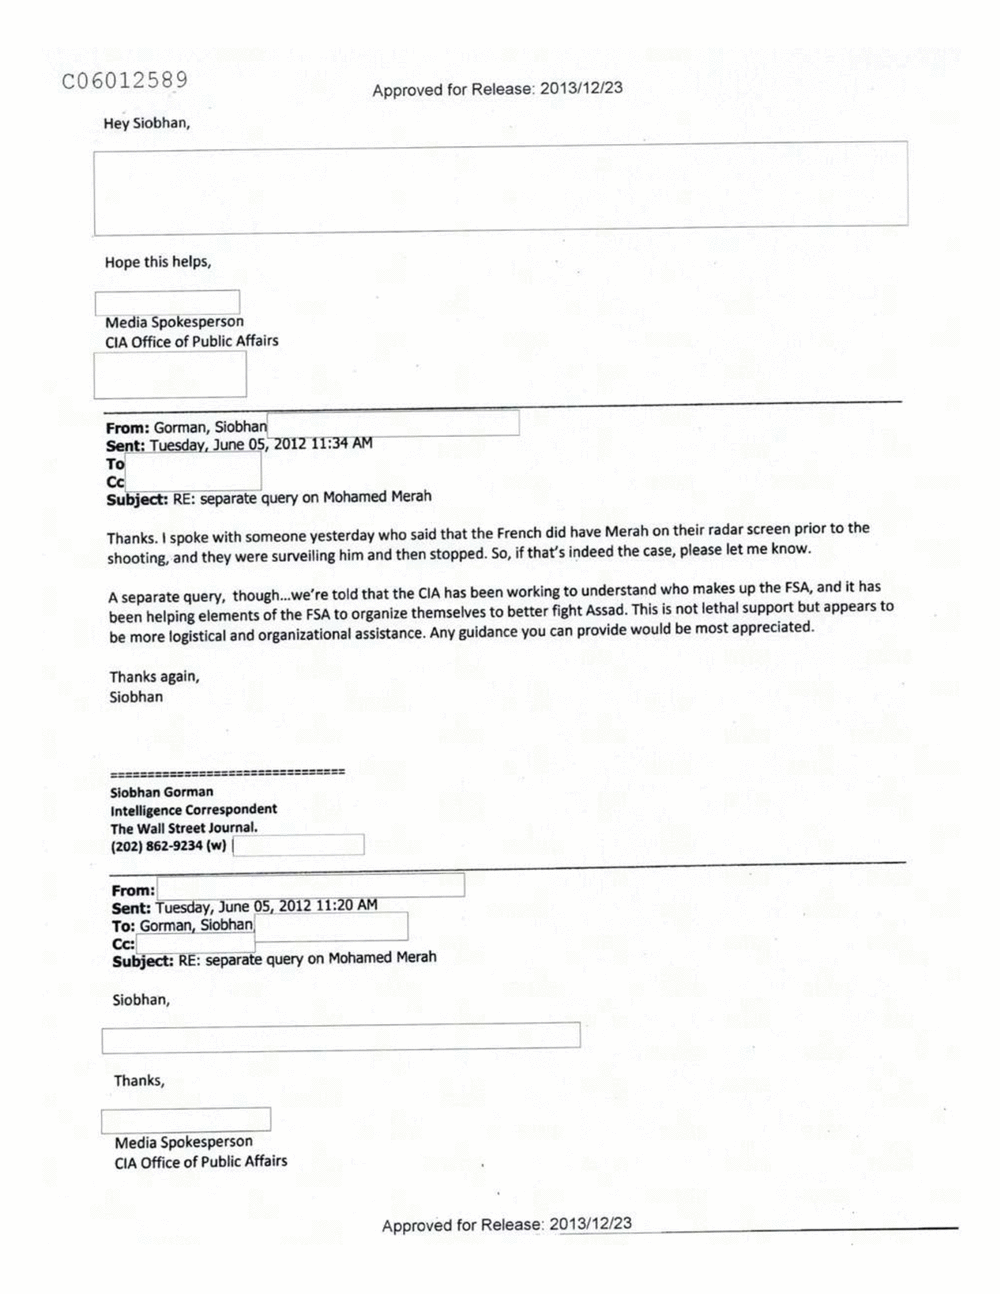 Page 140 from Email Correspondence Between Reporters and CIA Flacks